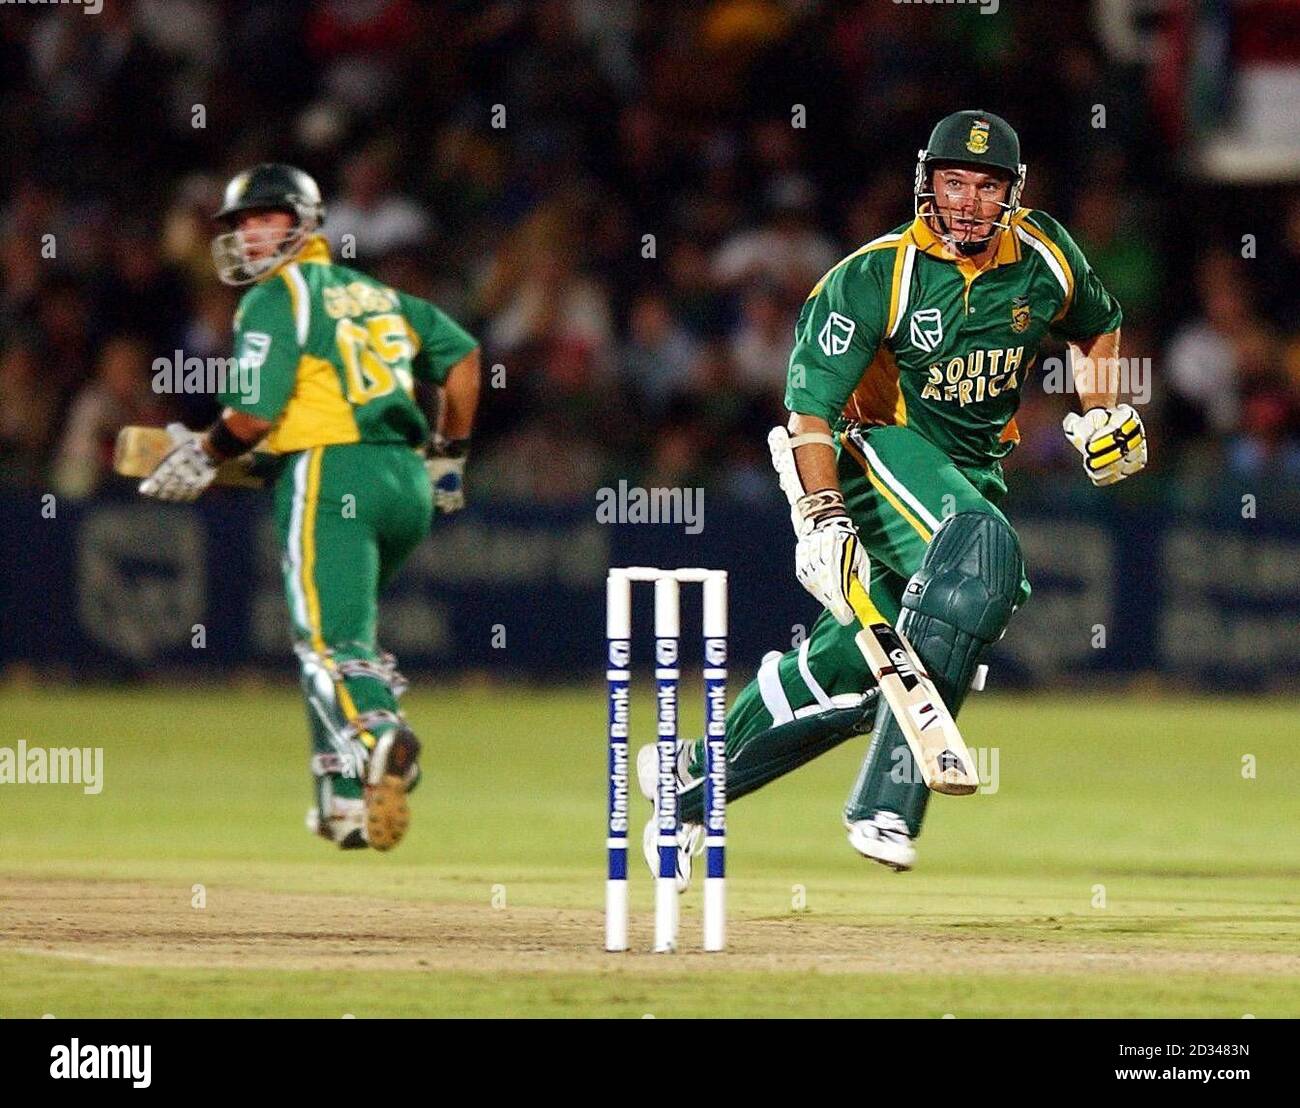 South Africa captain Graeme Smith (right) runs between the wickets with batting partner herschelle Gibbs. Stock Photo